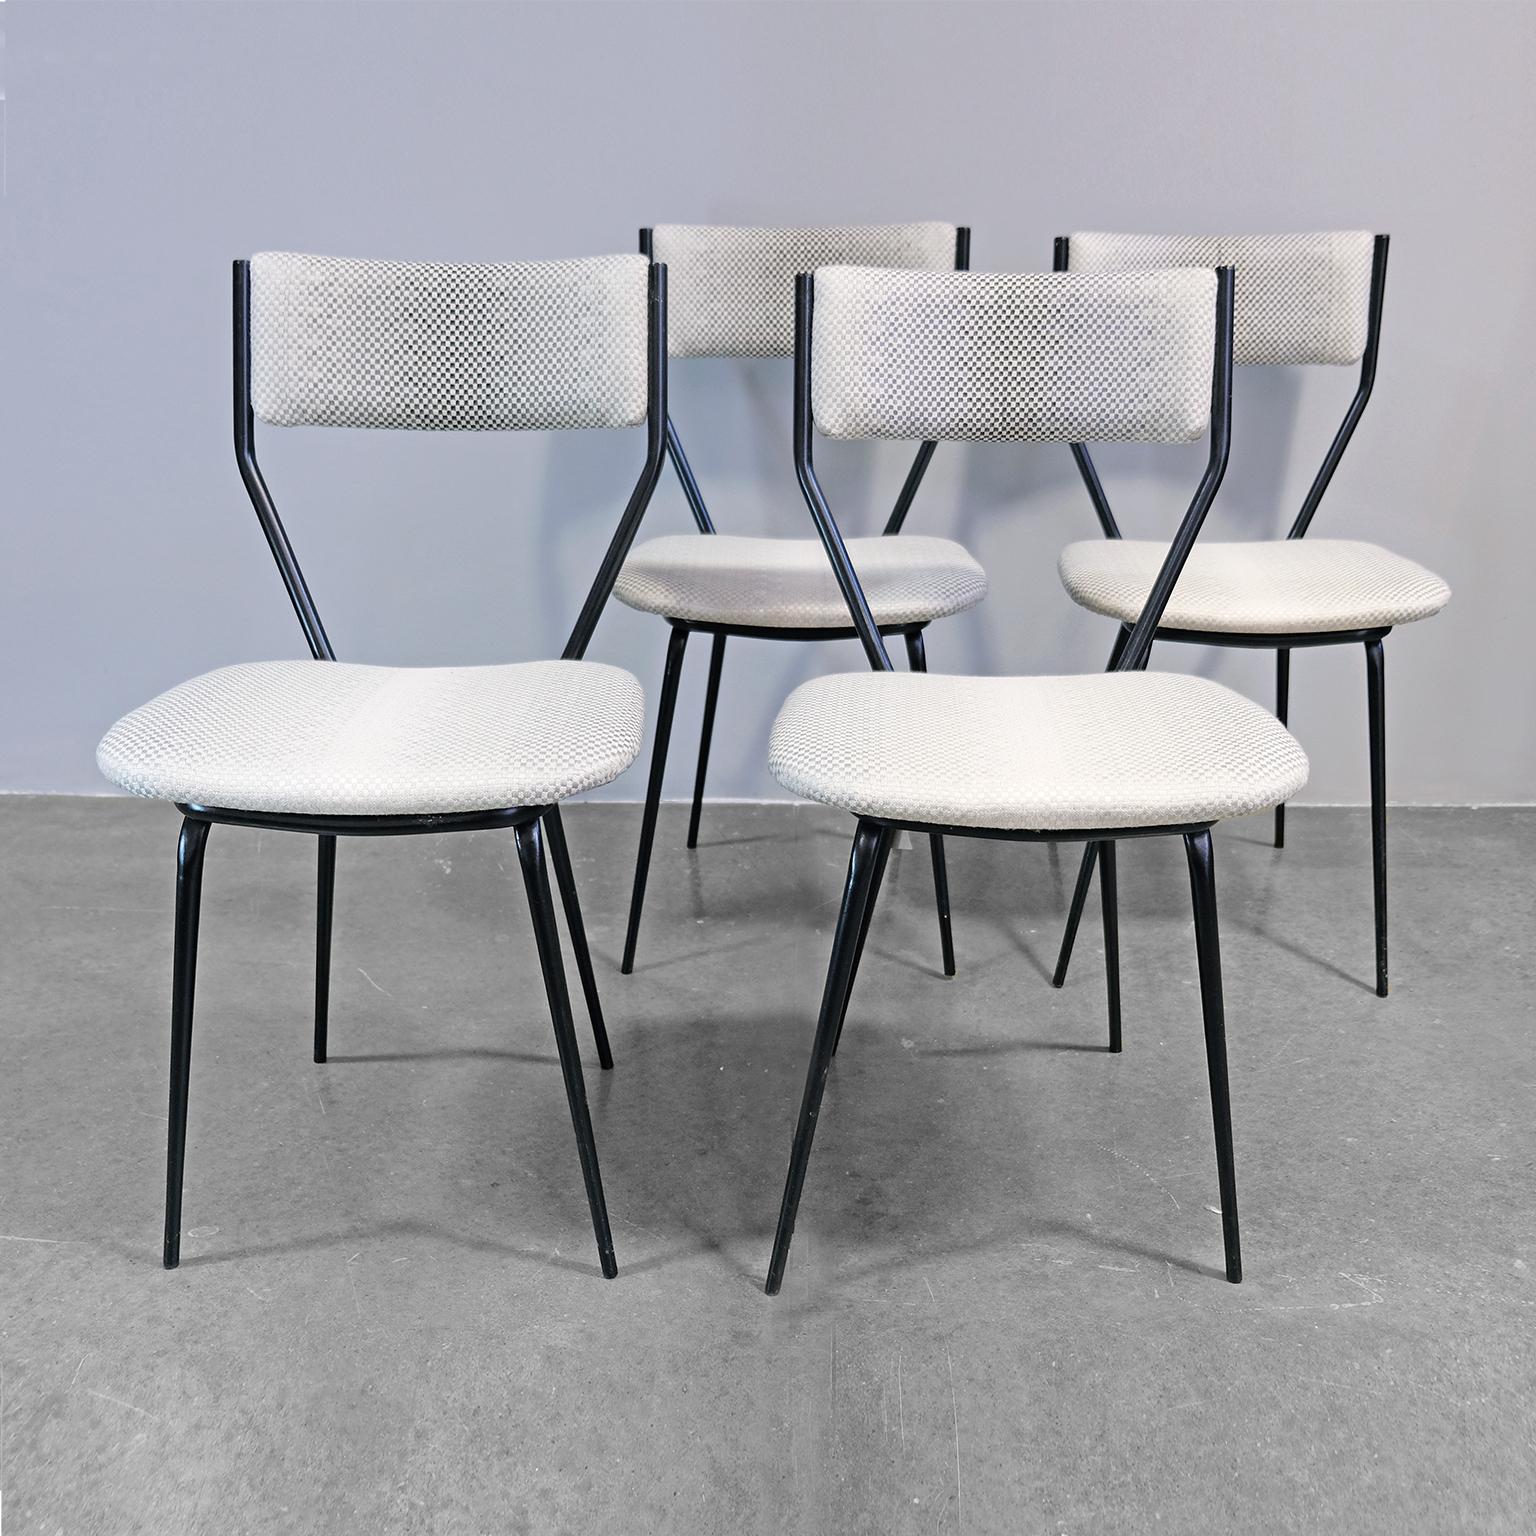 Set of four vintage dining chairs with structure in iron painted in black and seat and back with new upholstery. Made in 1950s and with a Portuguese origin, in Gio Ponti characteristic delicate design style. The iron legs made a discreet tapered